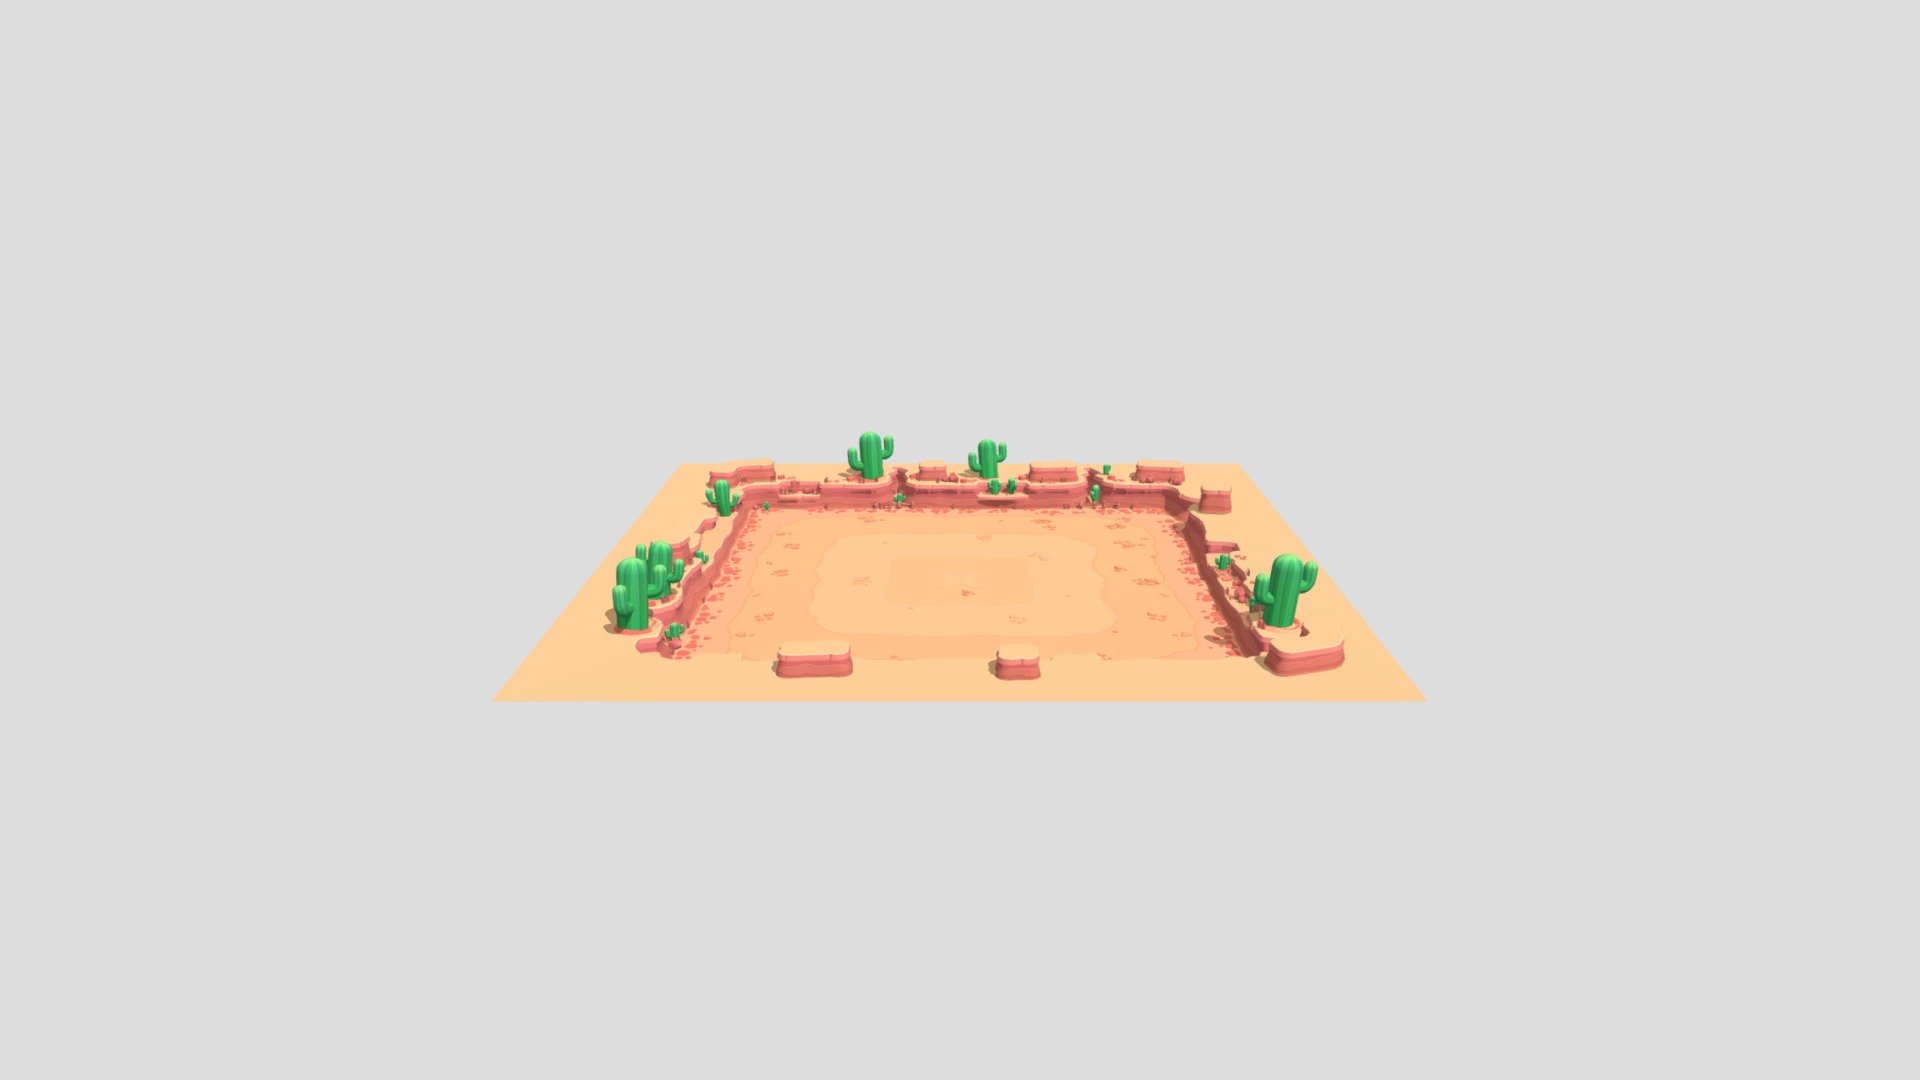 Go alone to fight in the Showdown Arena! Whoever's still standing at the end wins 3d model